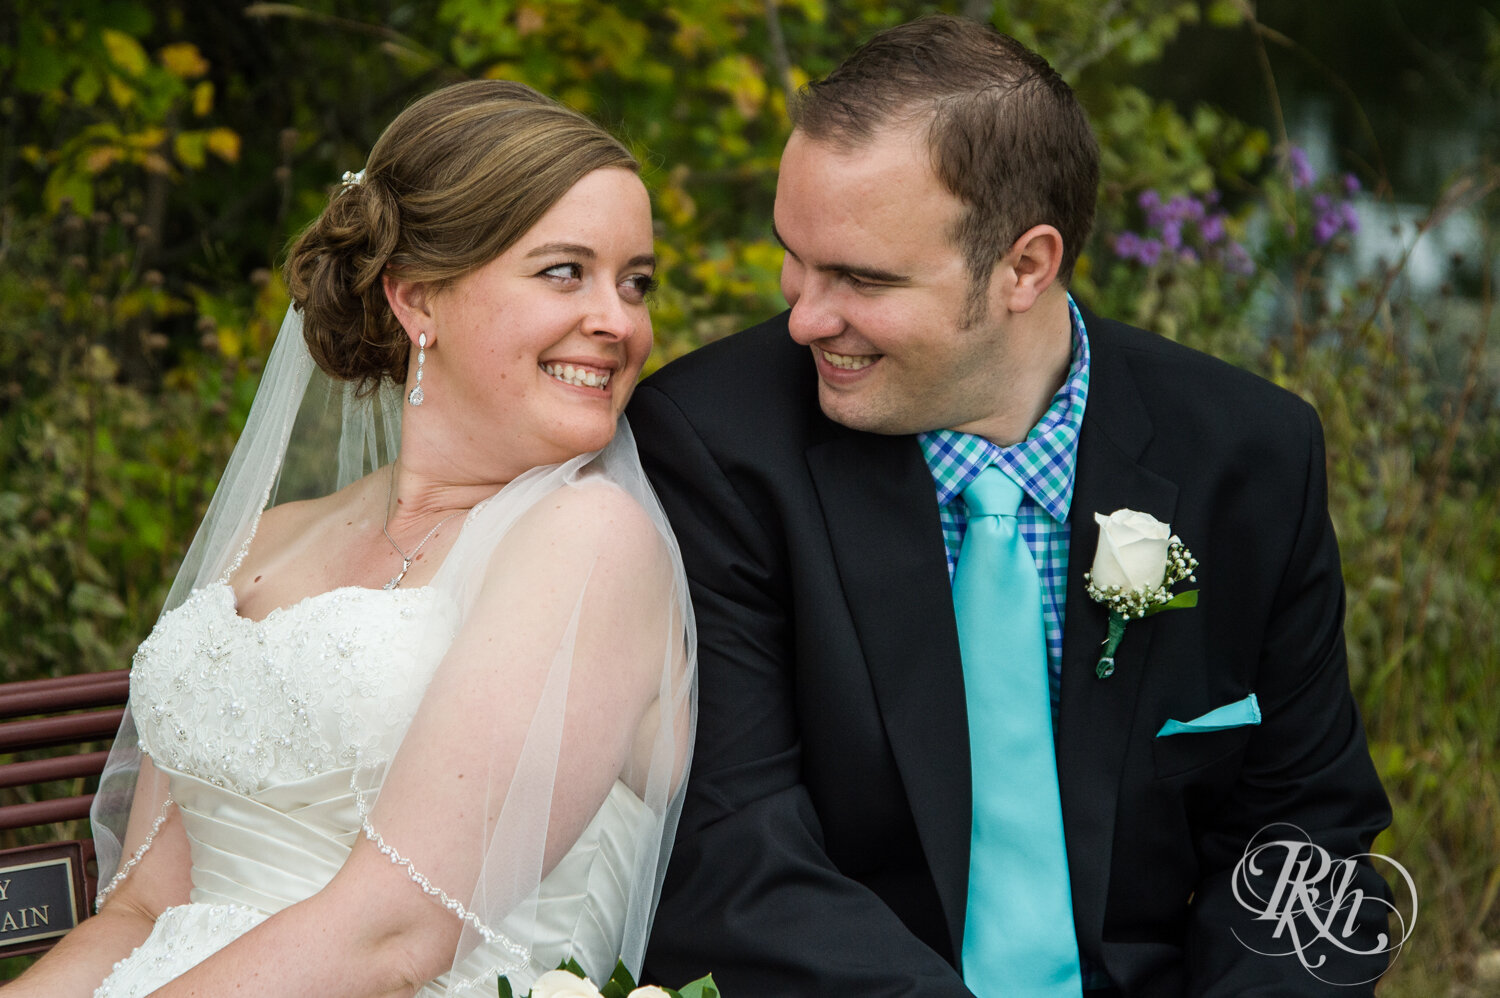 Bride and groom smile by wildflowers at Eagan Community Center in Eagan, Minnesota.